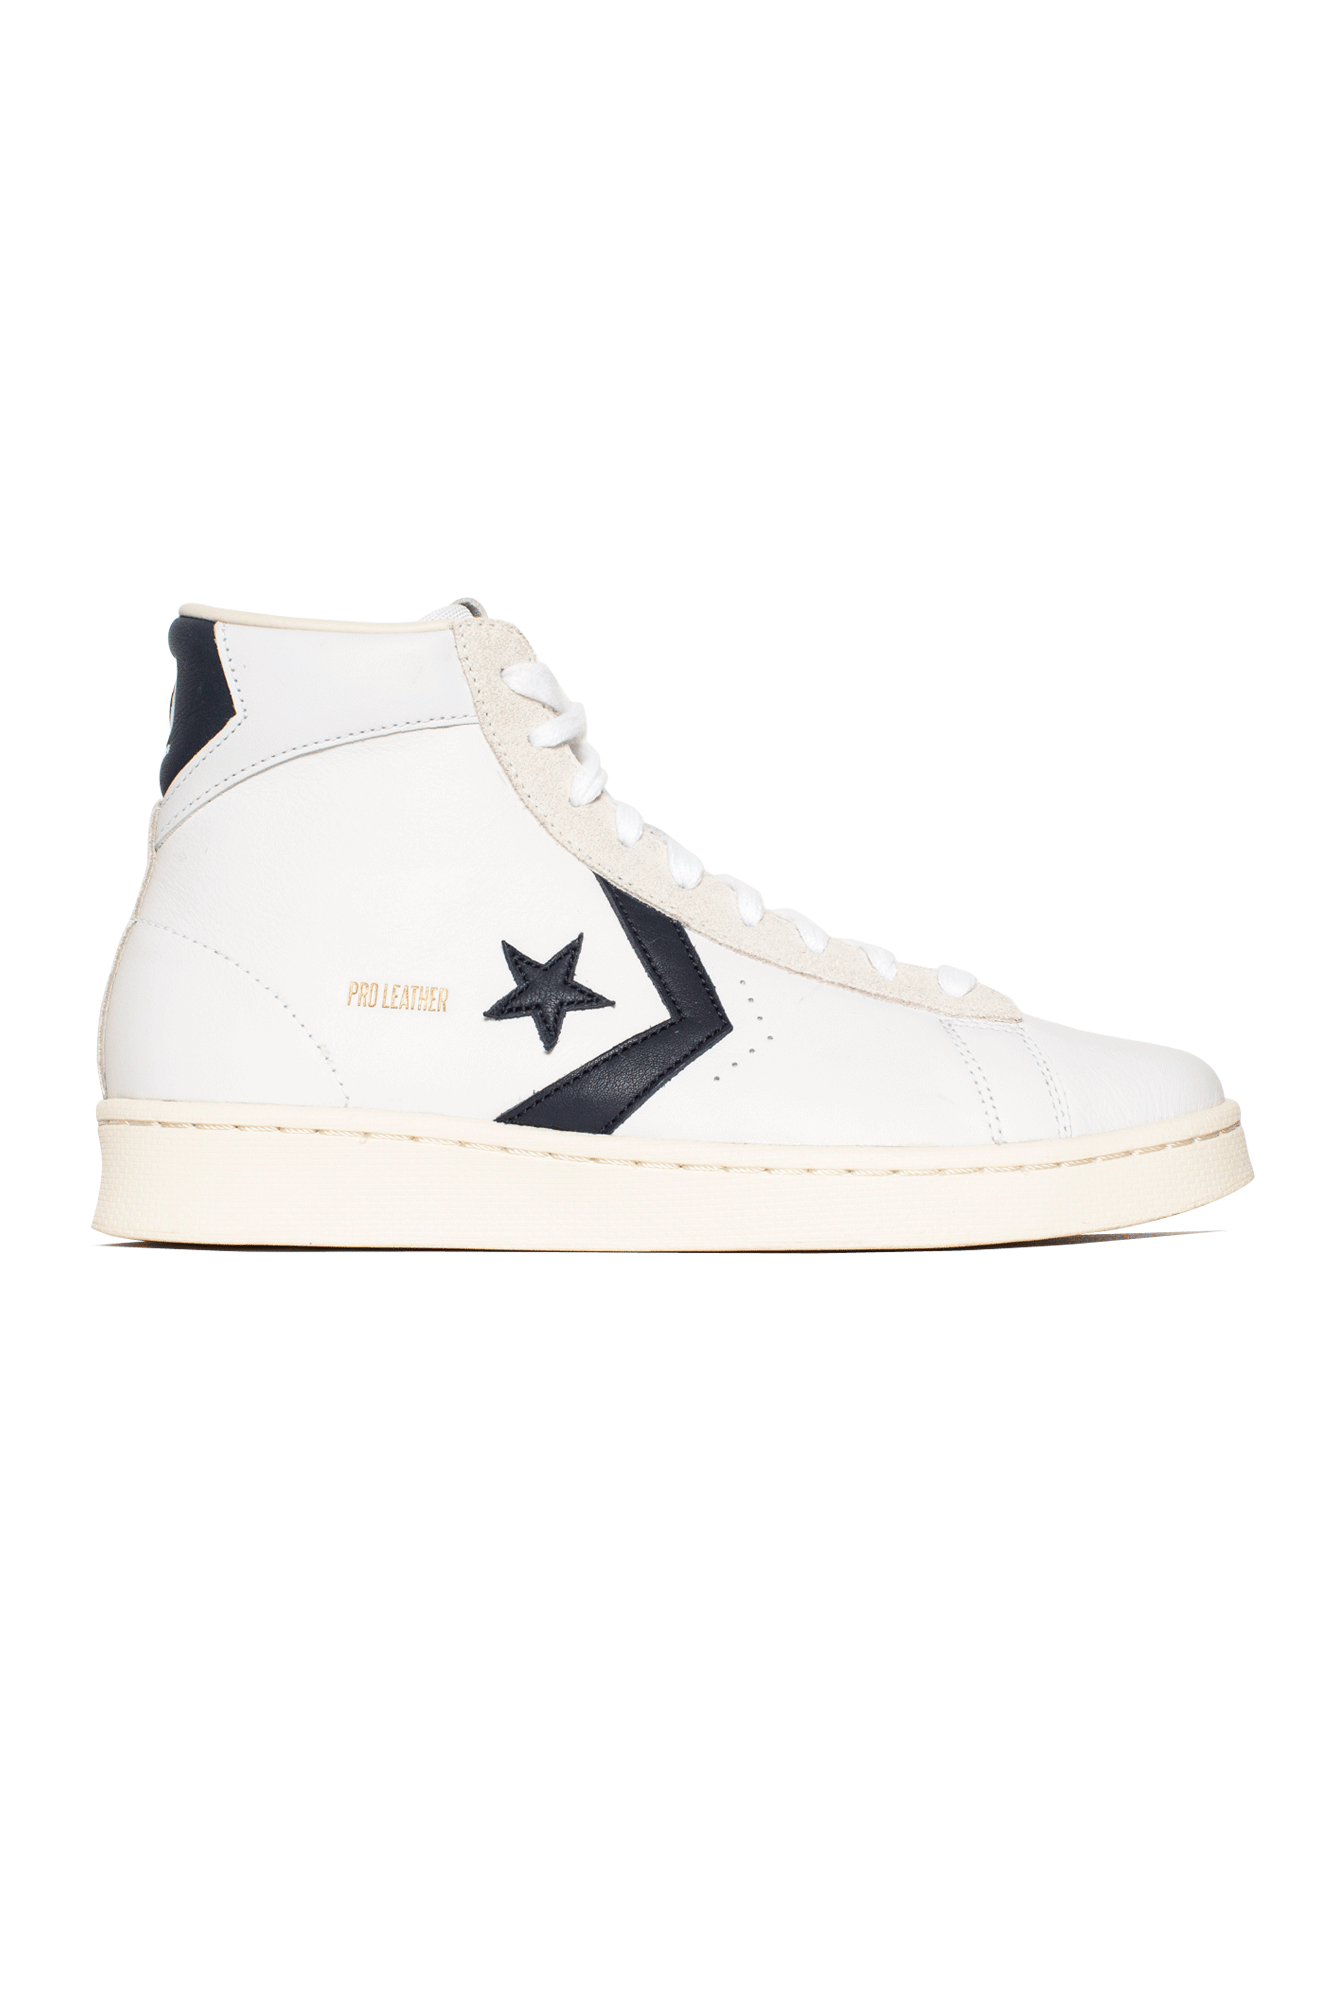 converse pro leather chicago